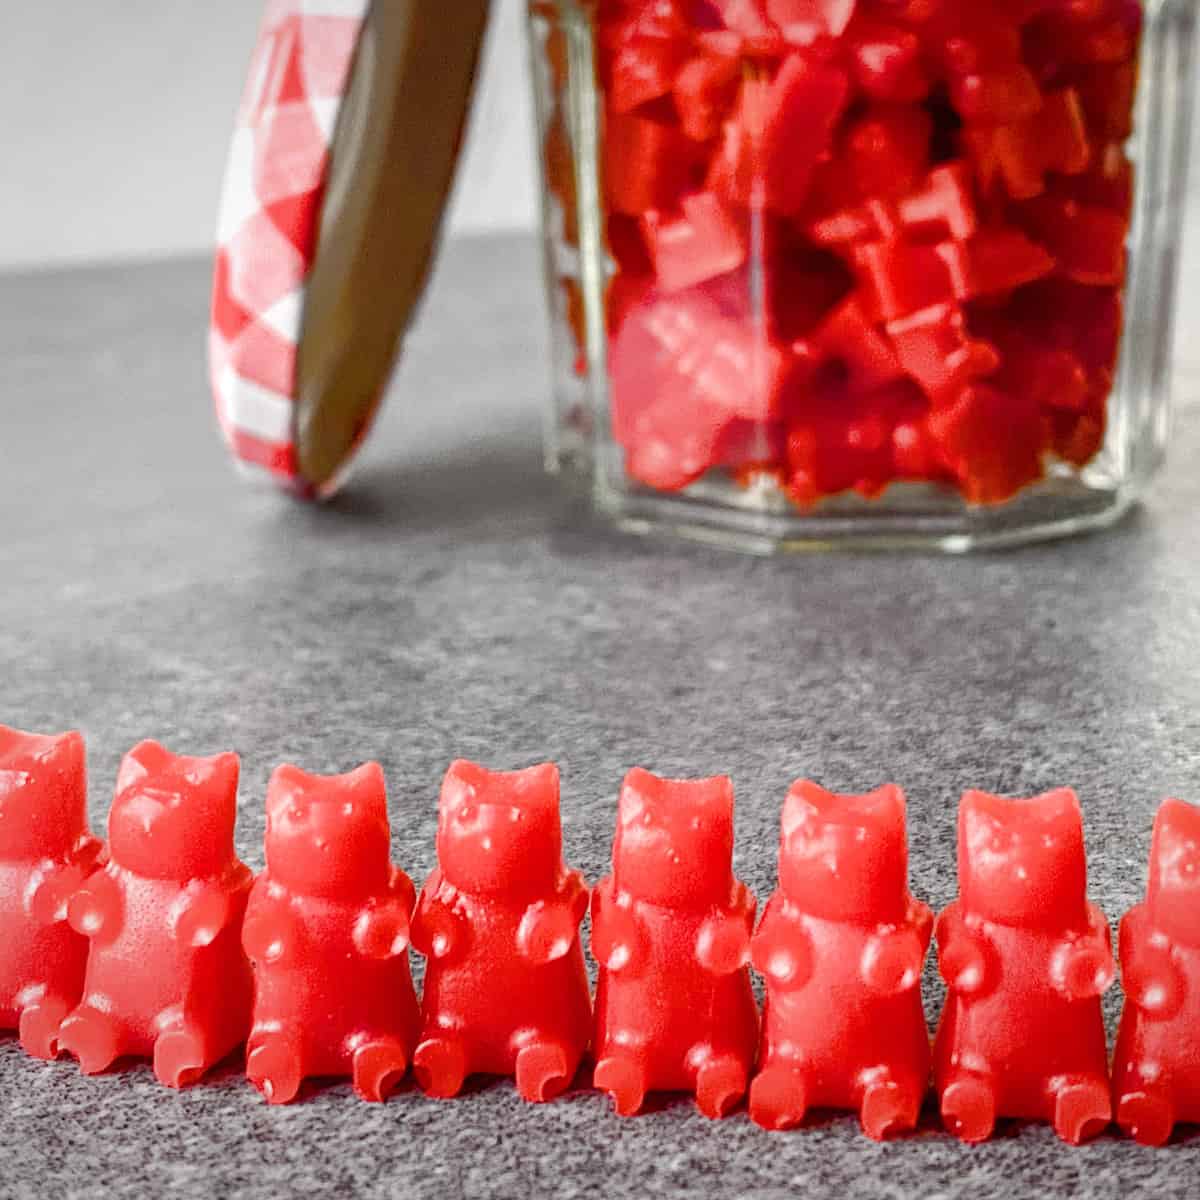 Shop Gummy Molds, Droppers + Flavors for Making Gummies at Home